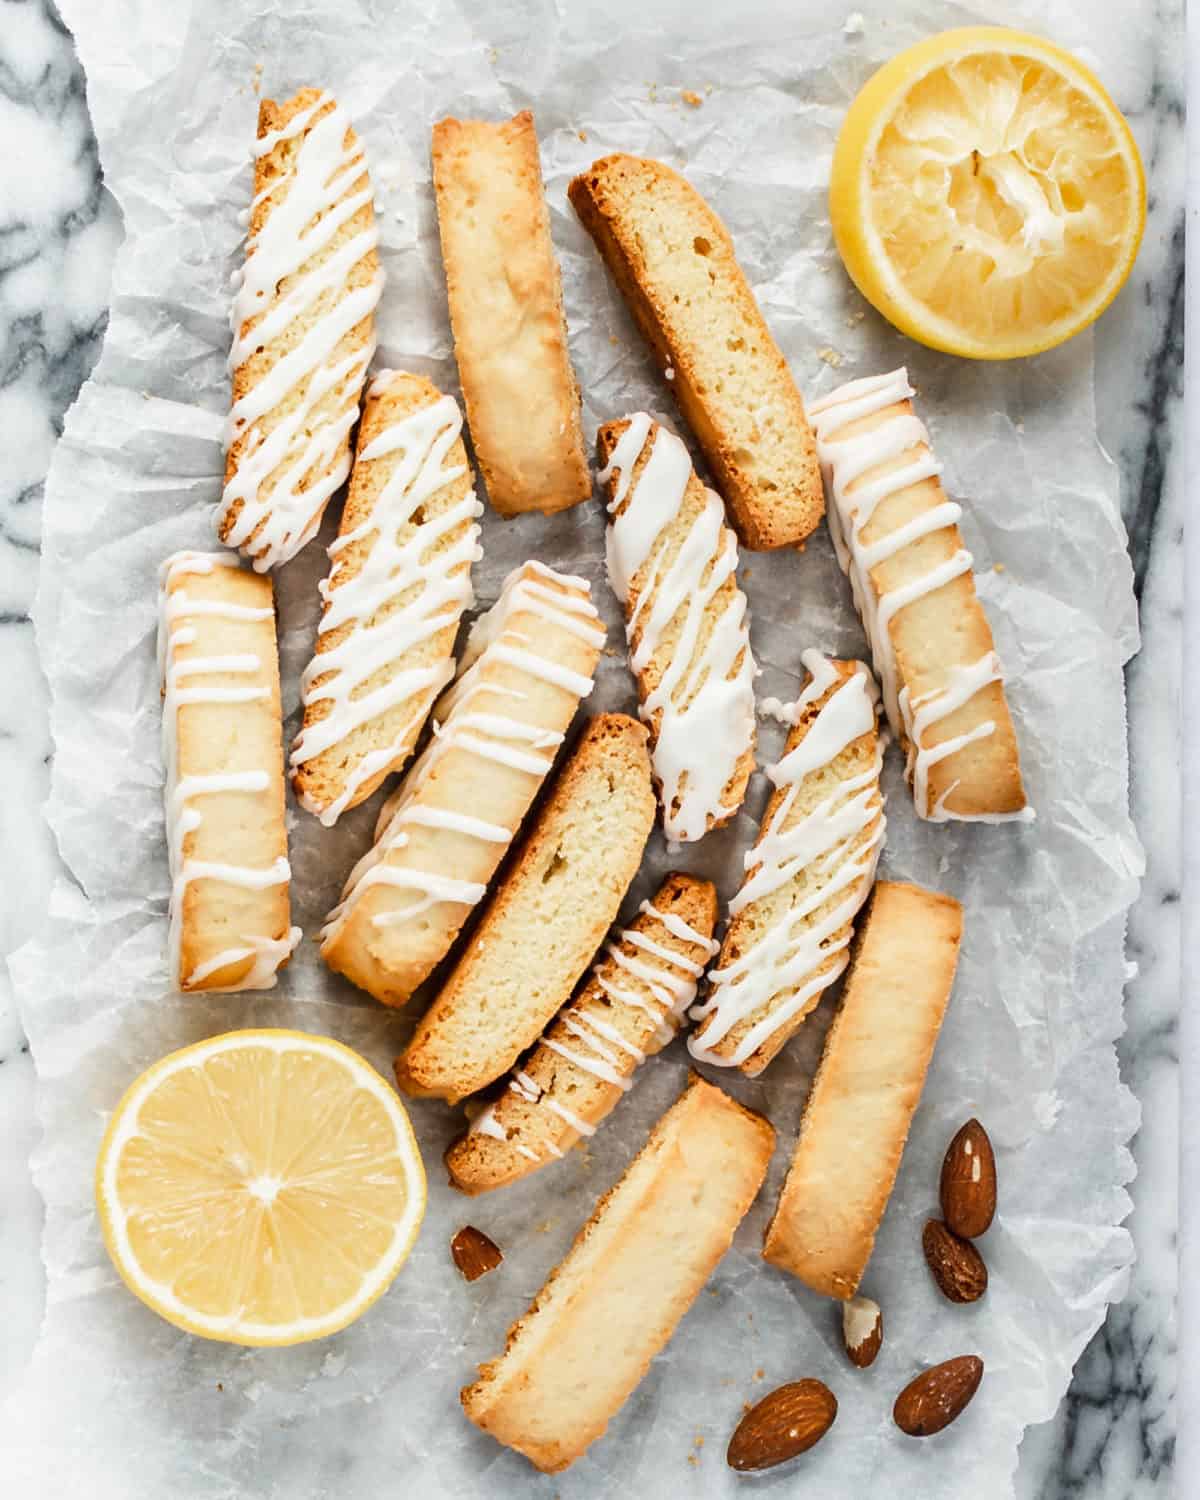 Many biscotti cookies scattered on a table.